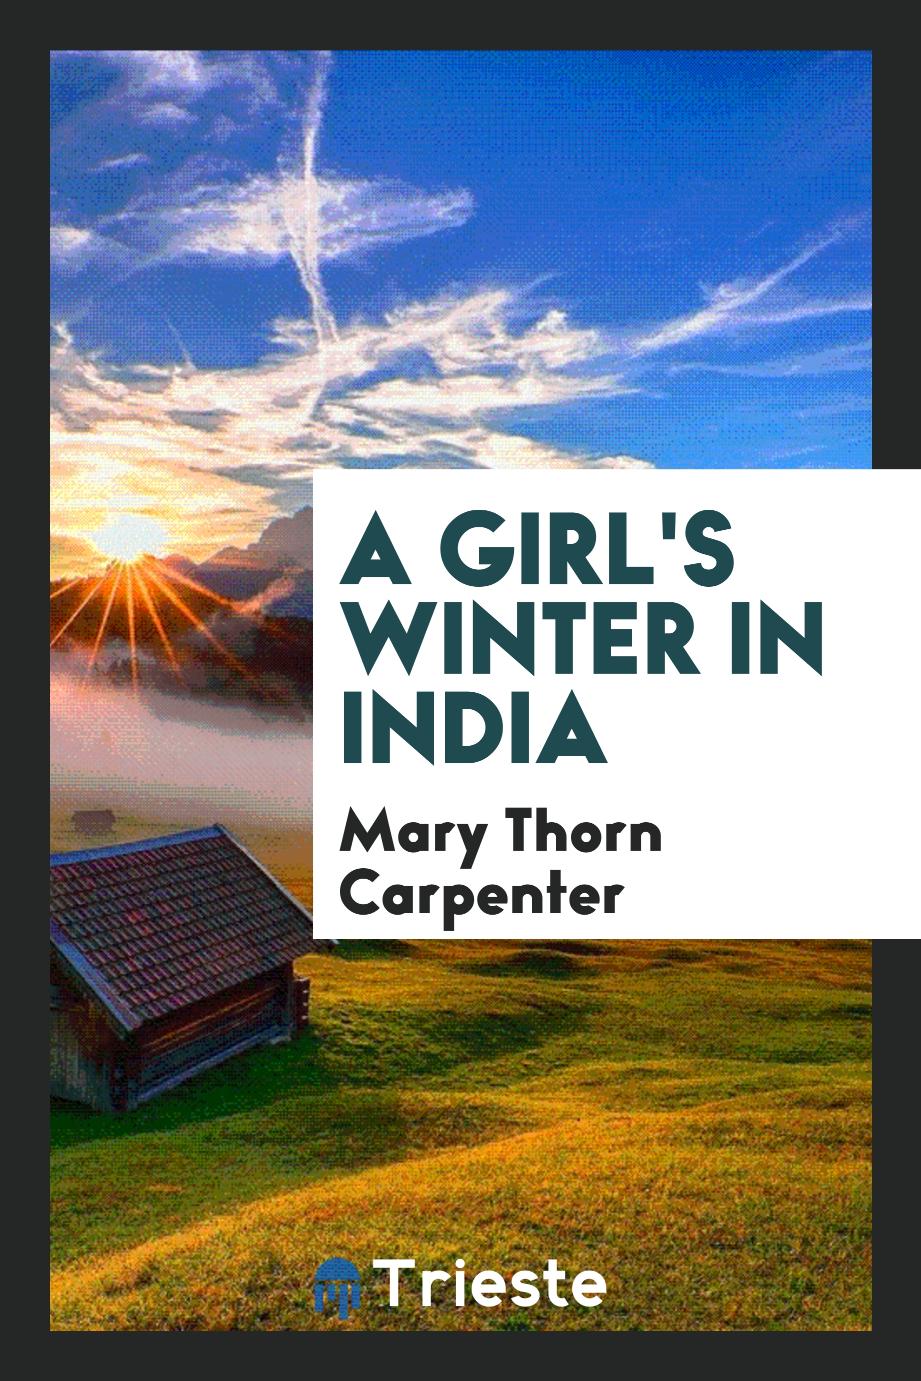 A girl's winter in India